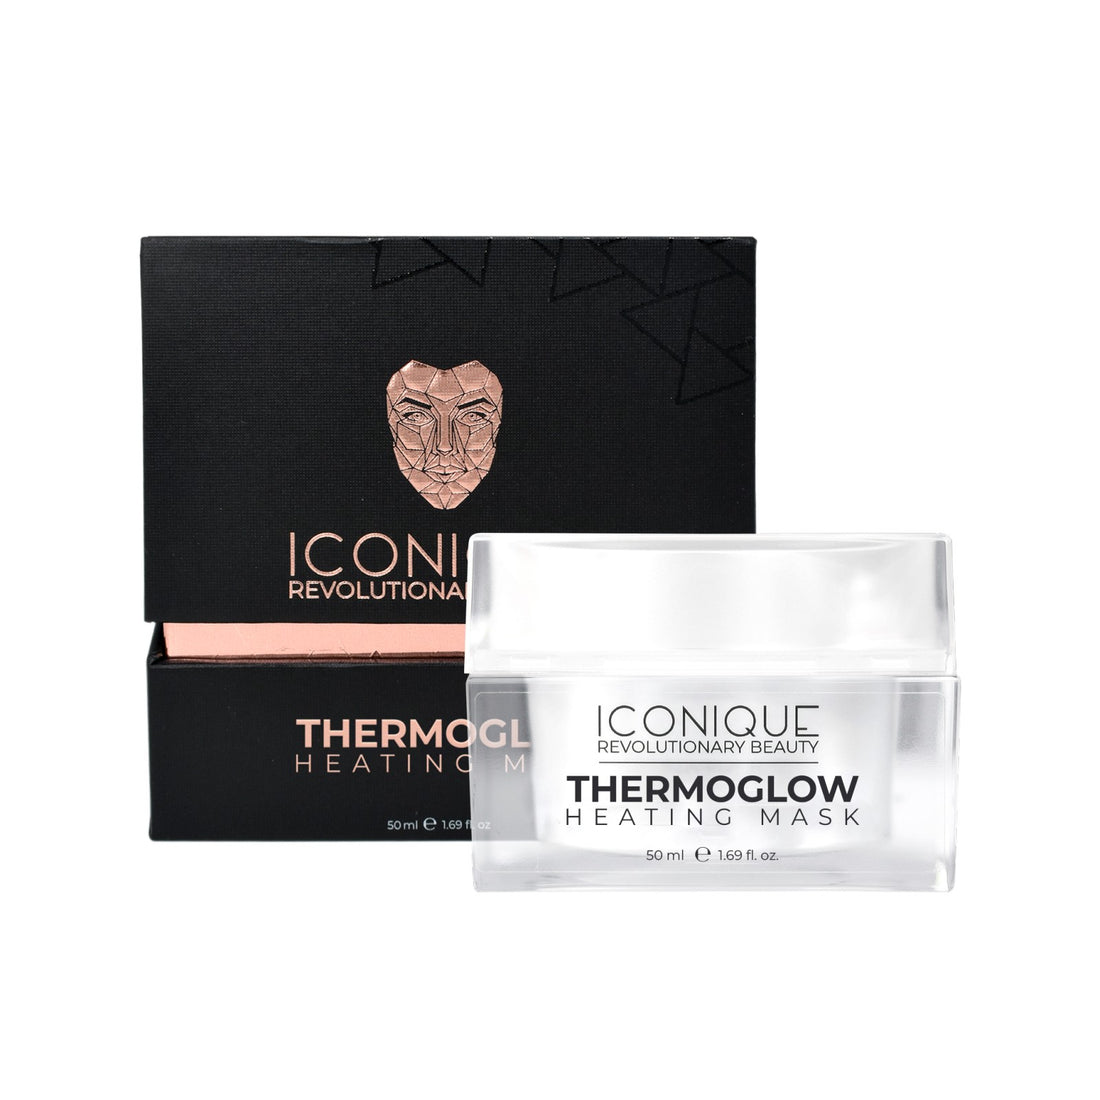 THERMOGLOW